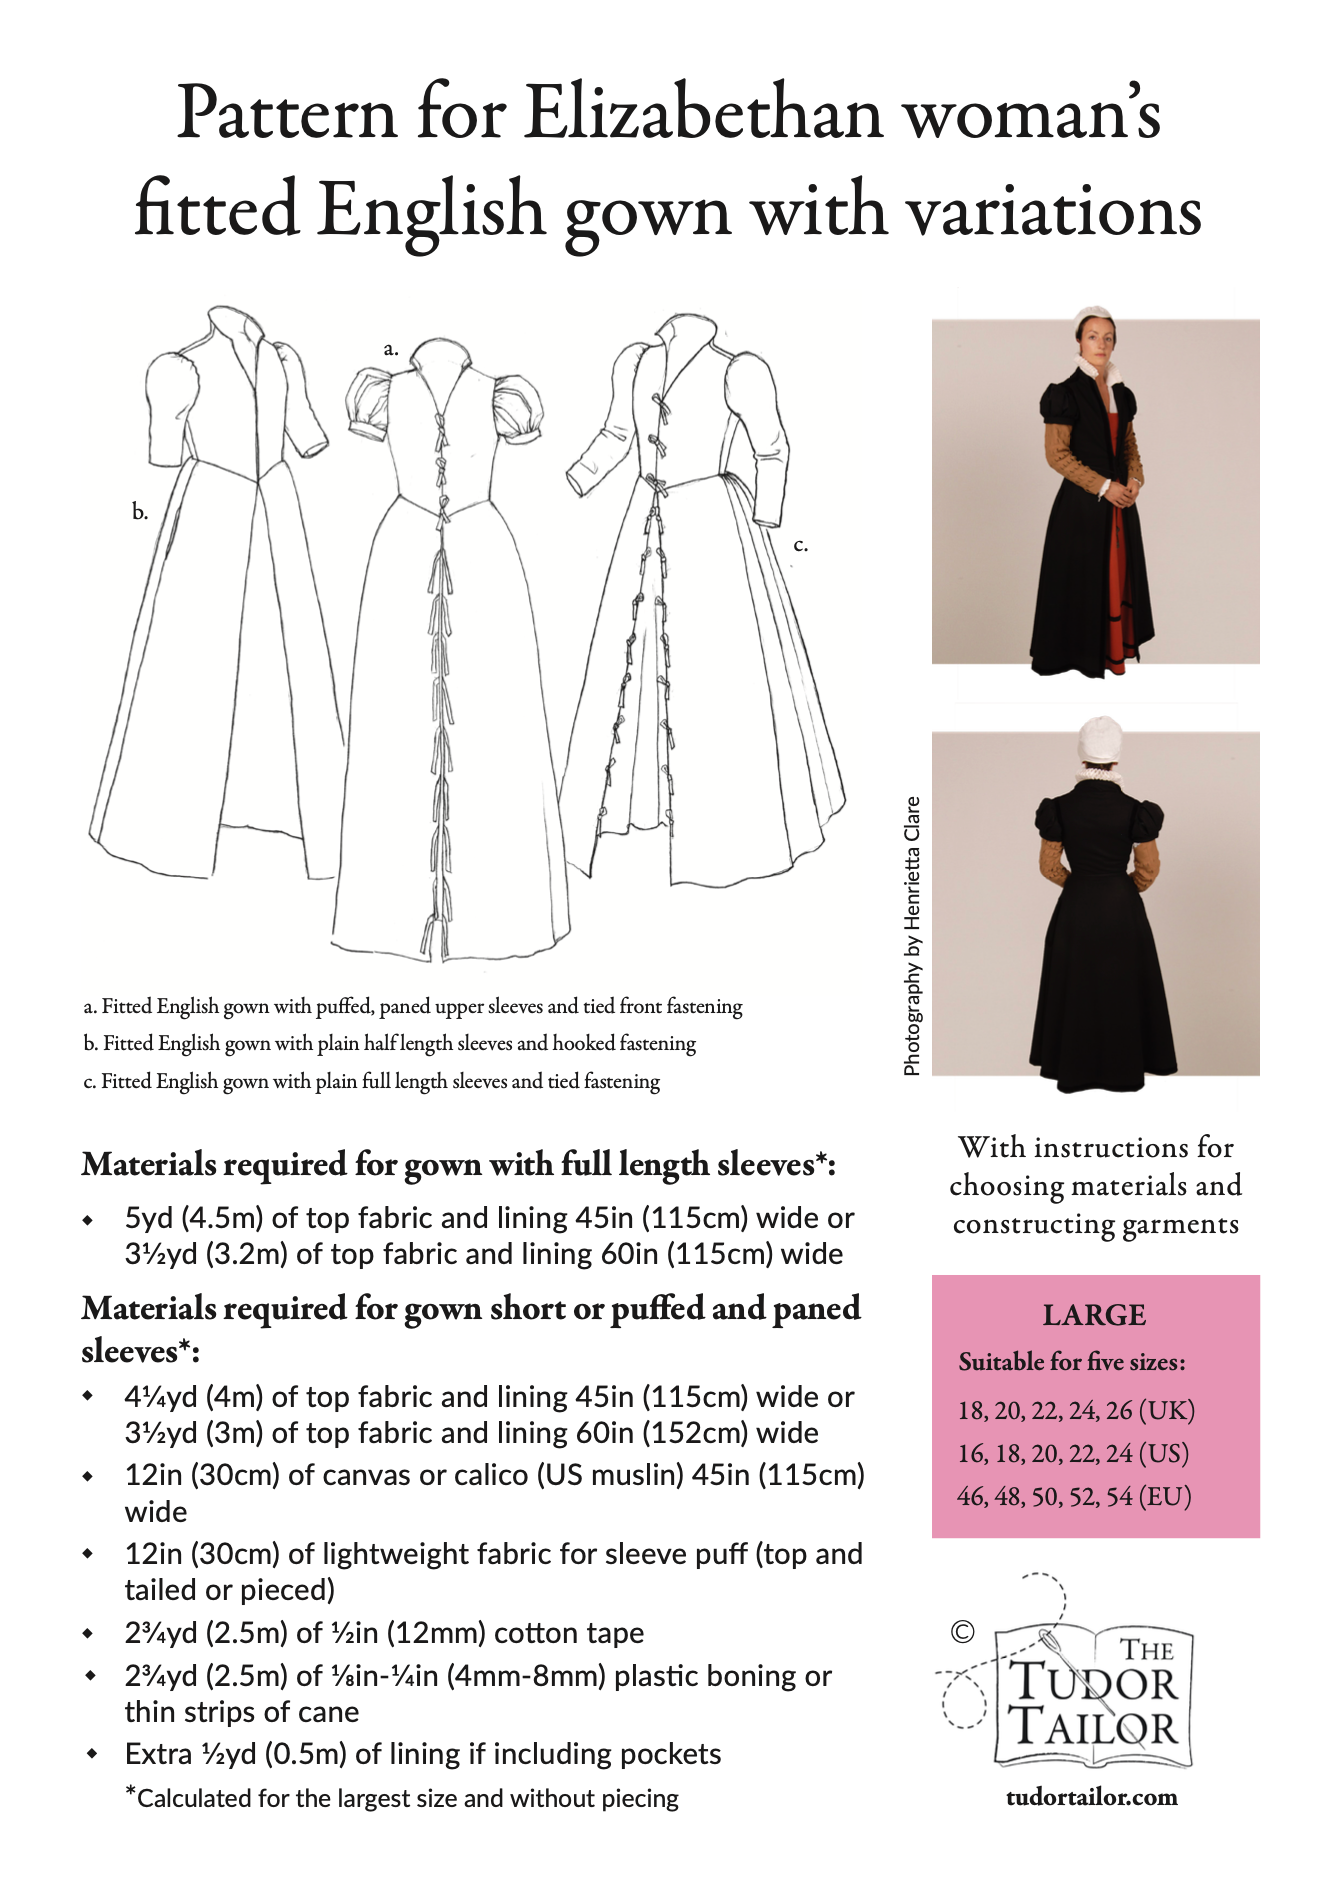 Pattern for Elizabethan woman's fitted English gown with variations